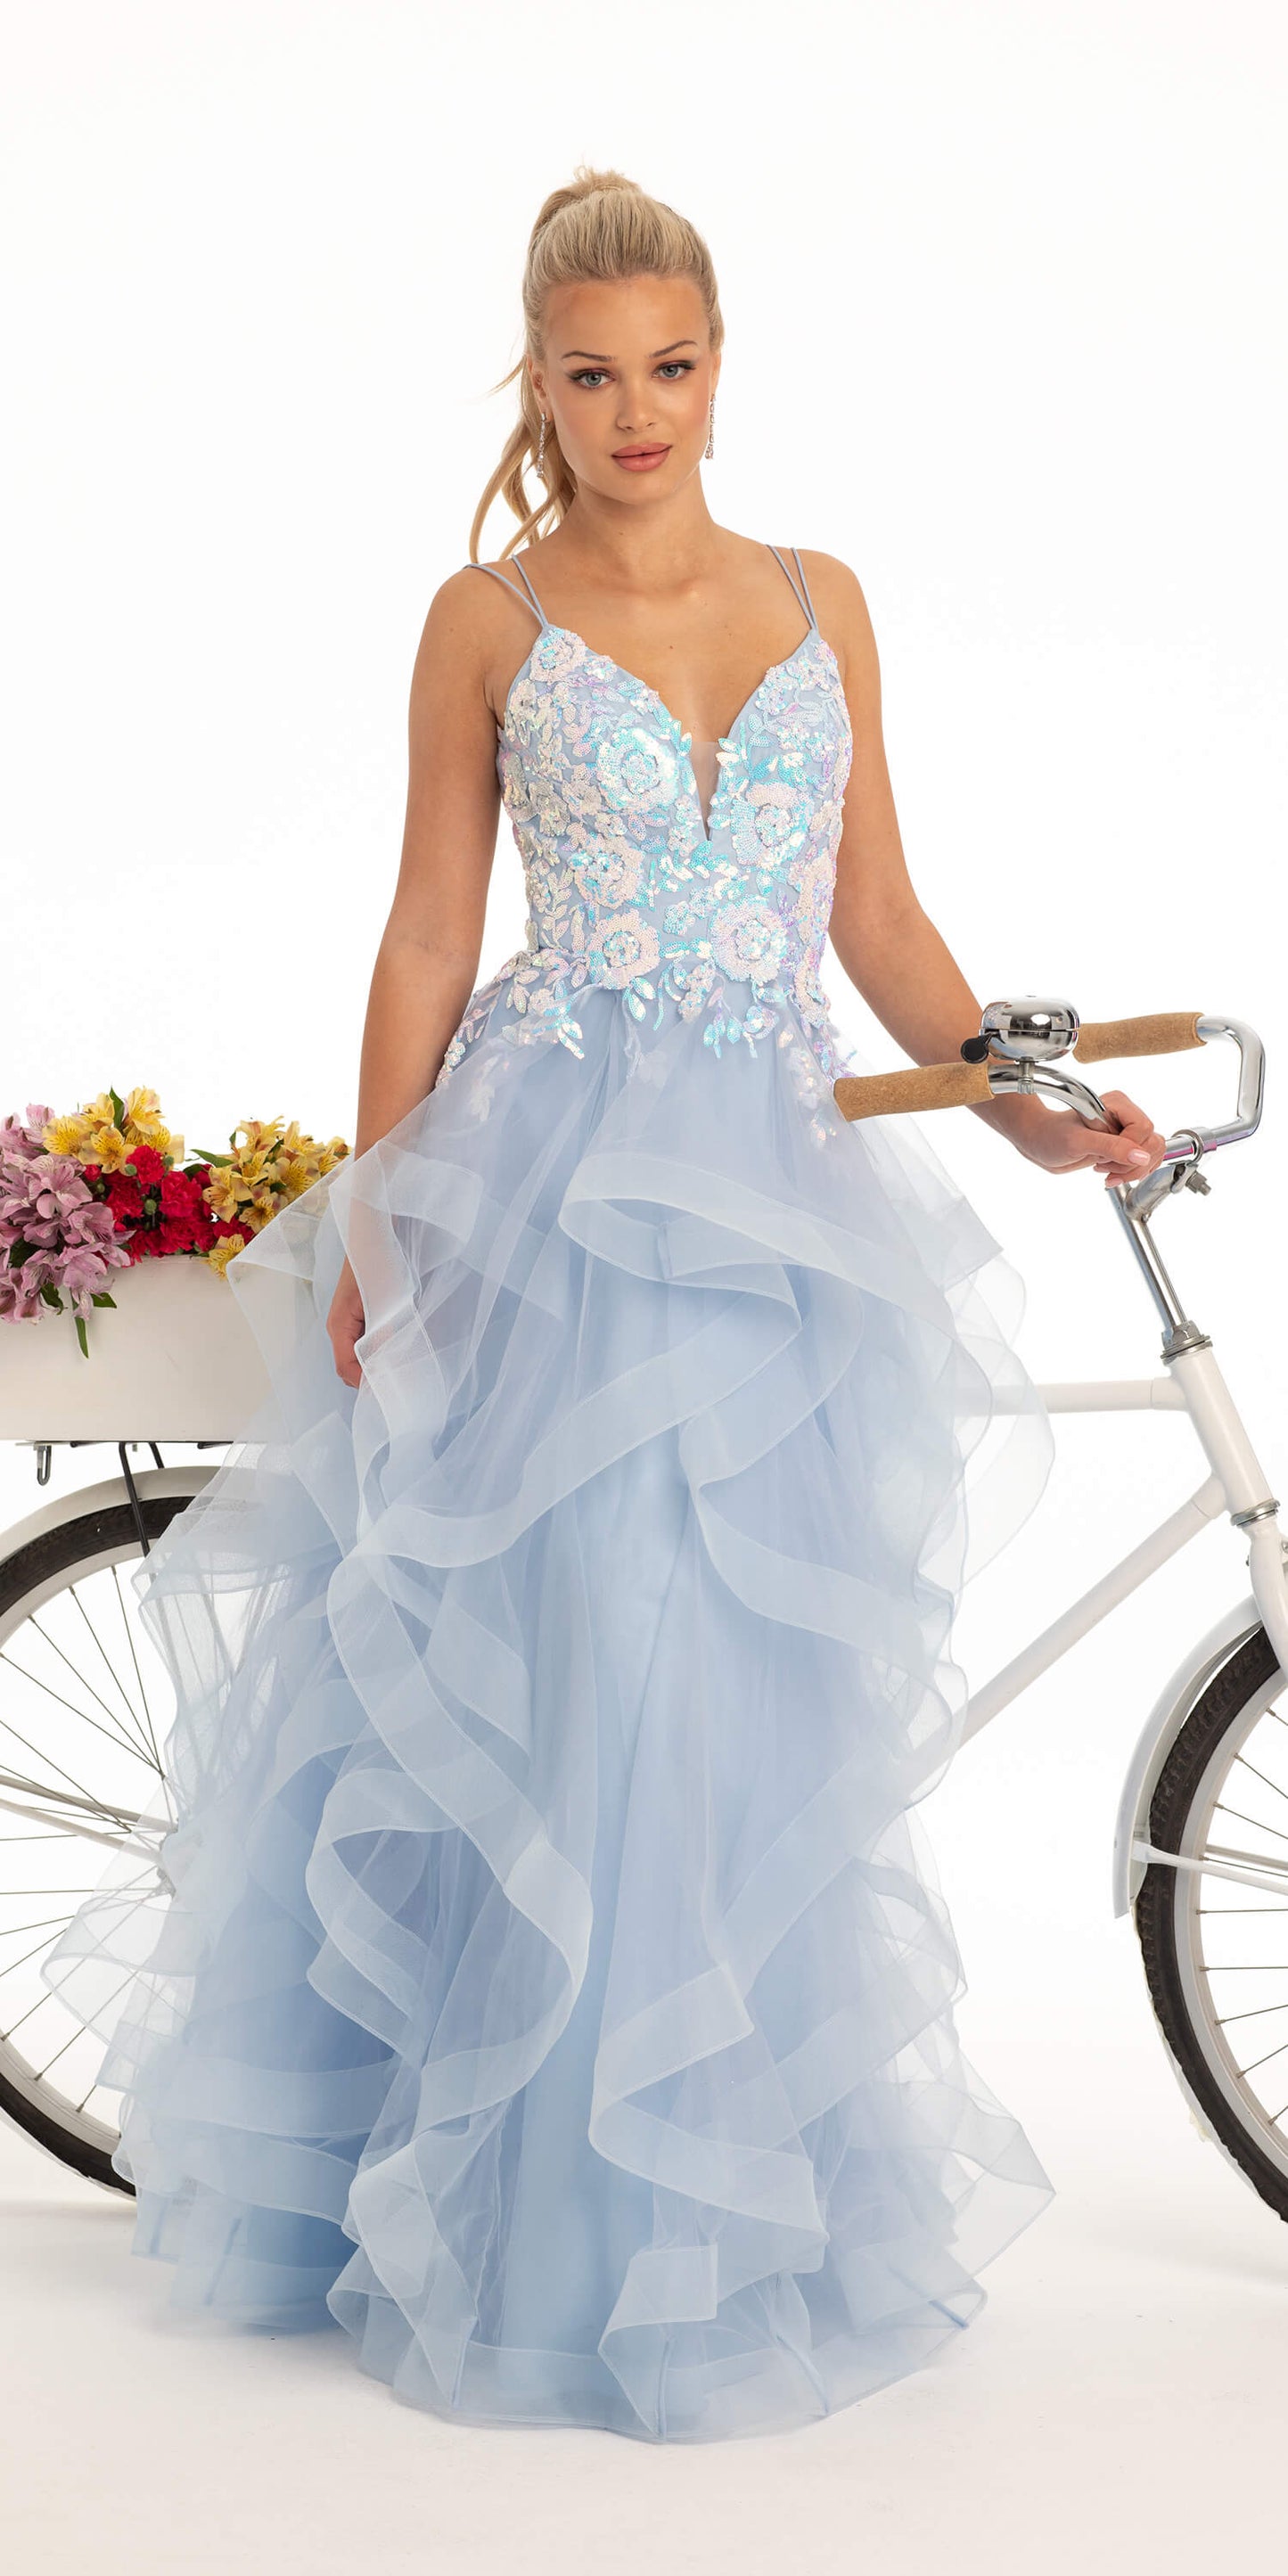 Camille La Vie Iridescent Sequin Plunging Tulle Tiered Ballgown missy / 0 / light-blue